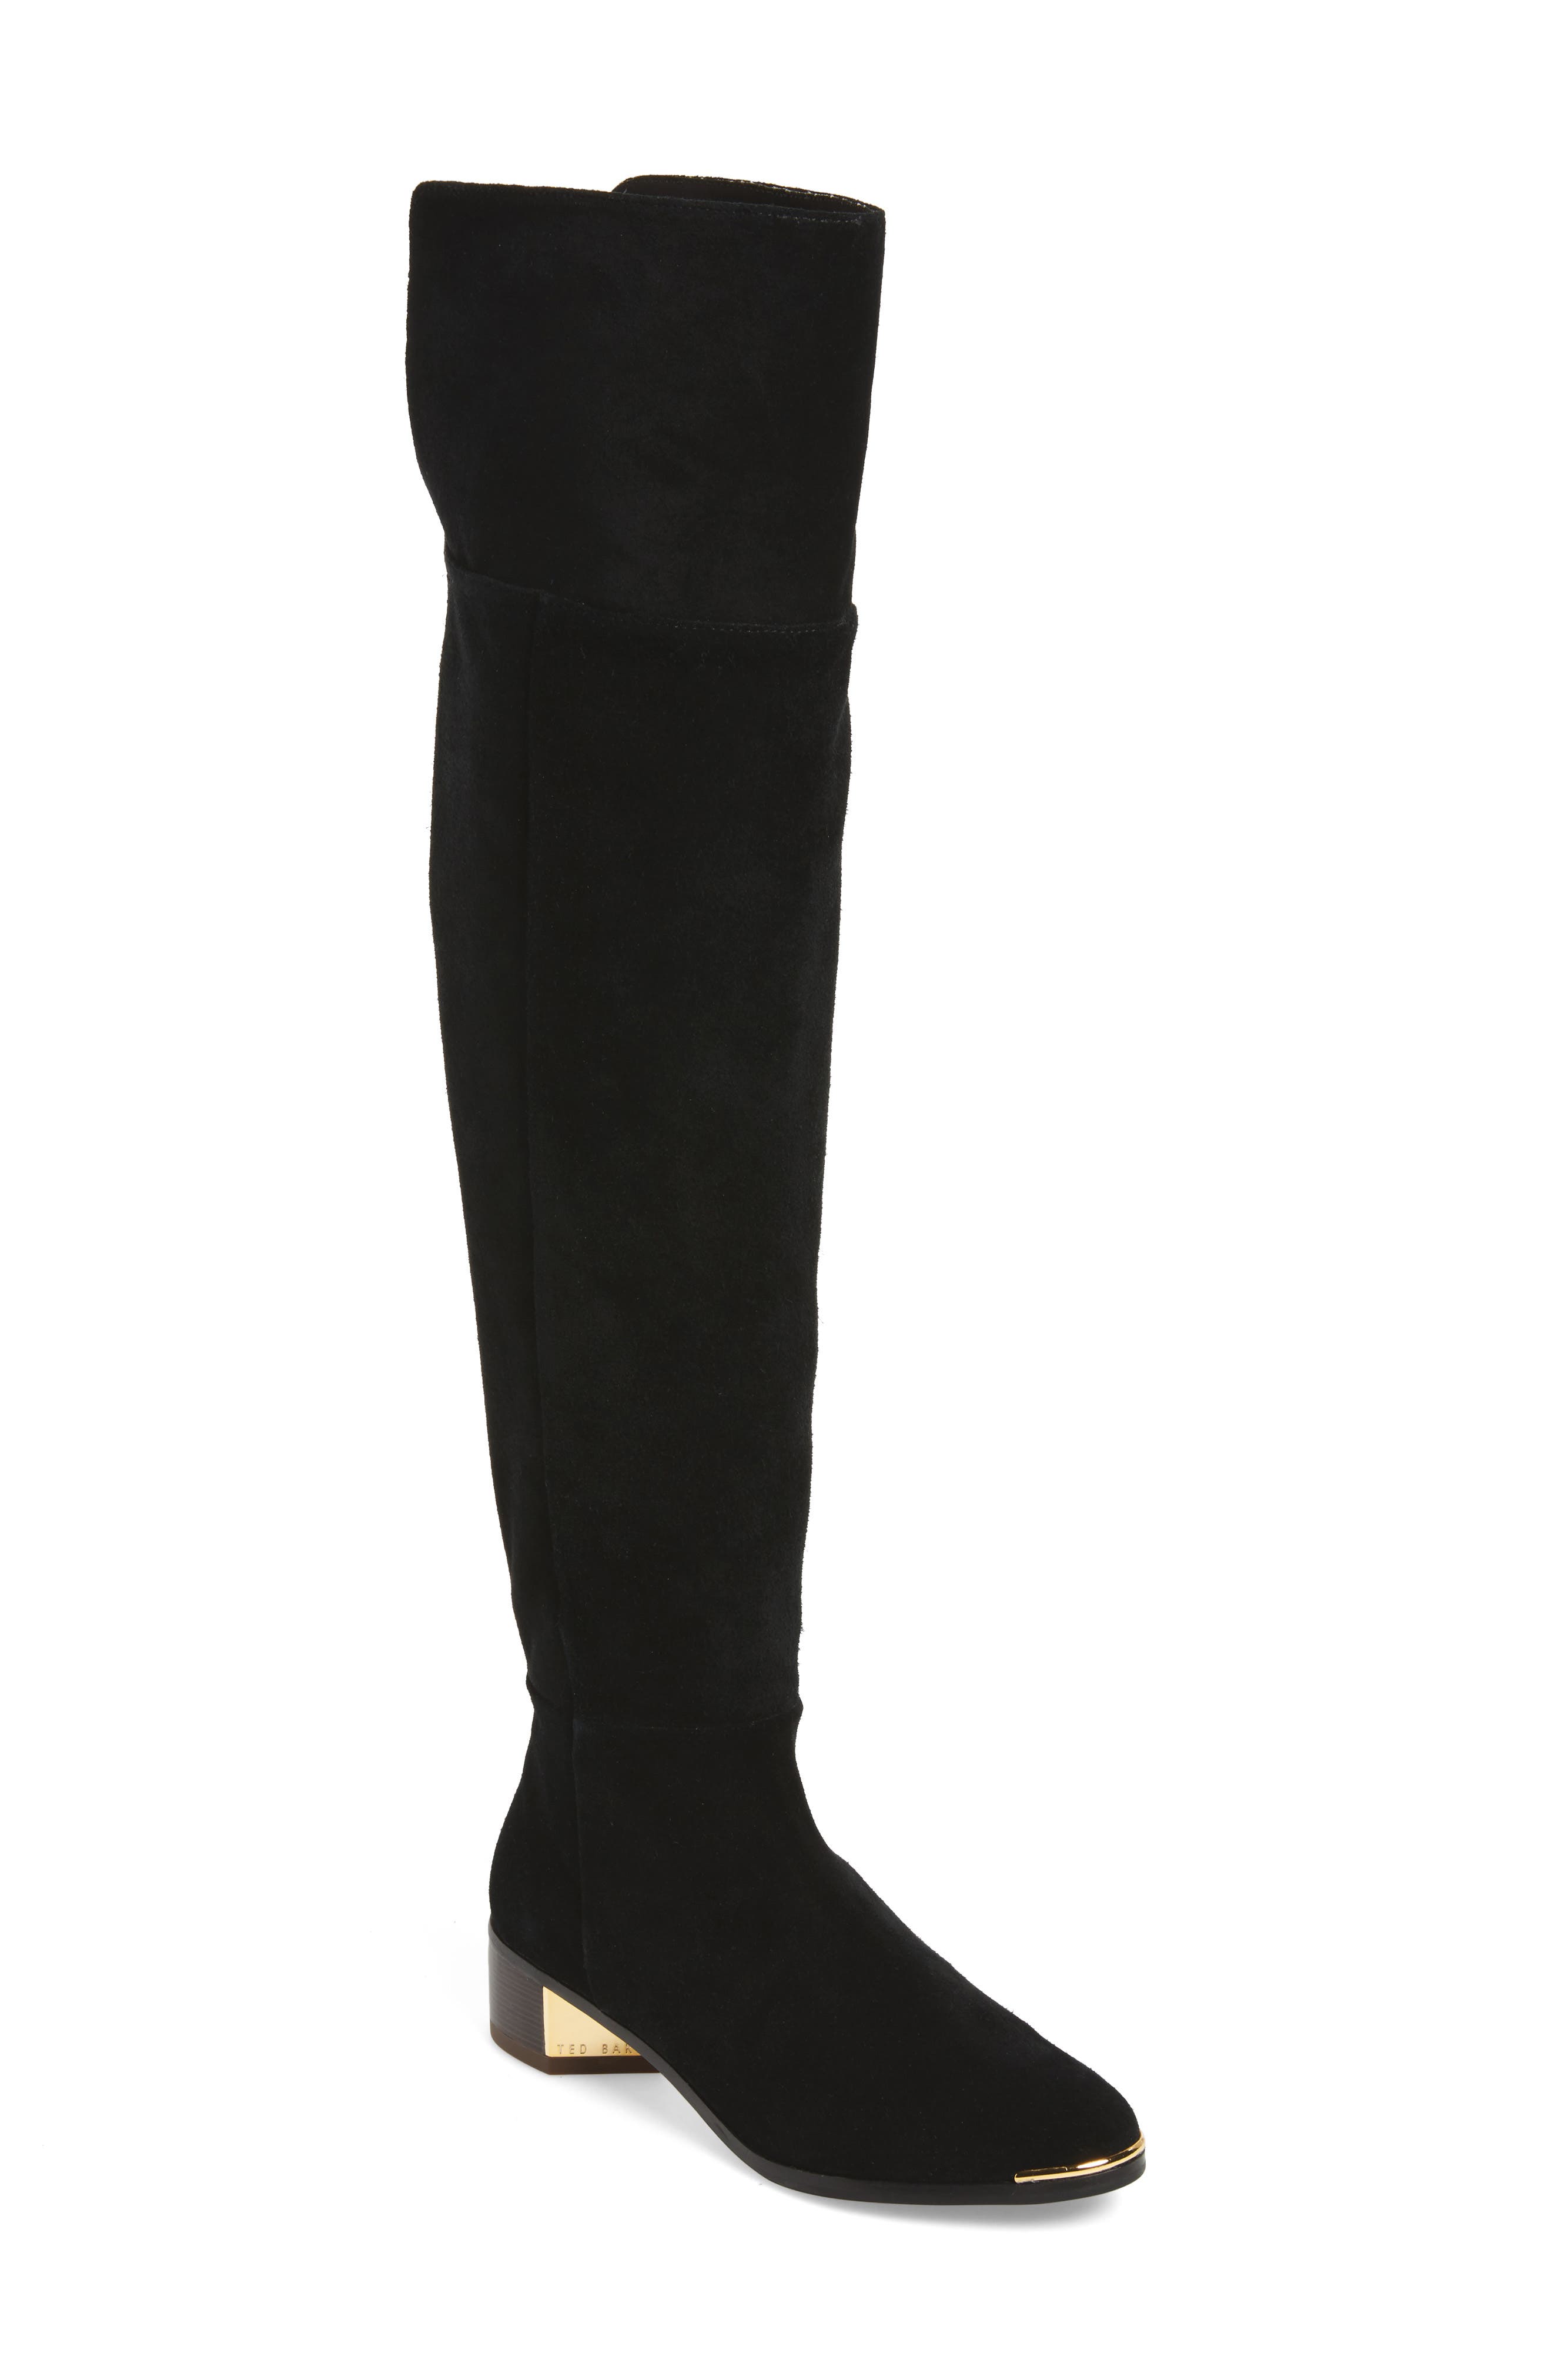 bakers over the knee boots